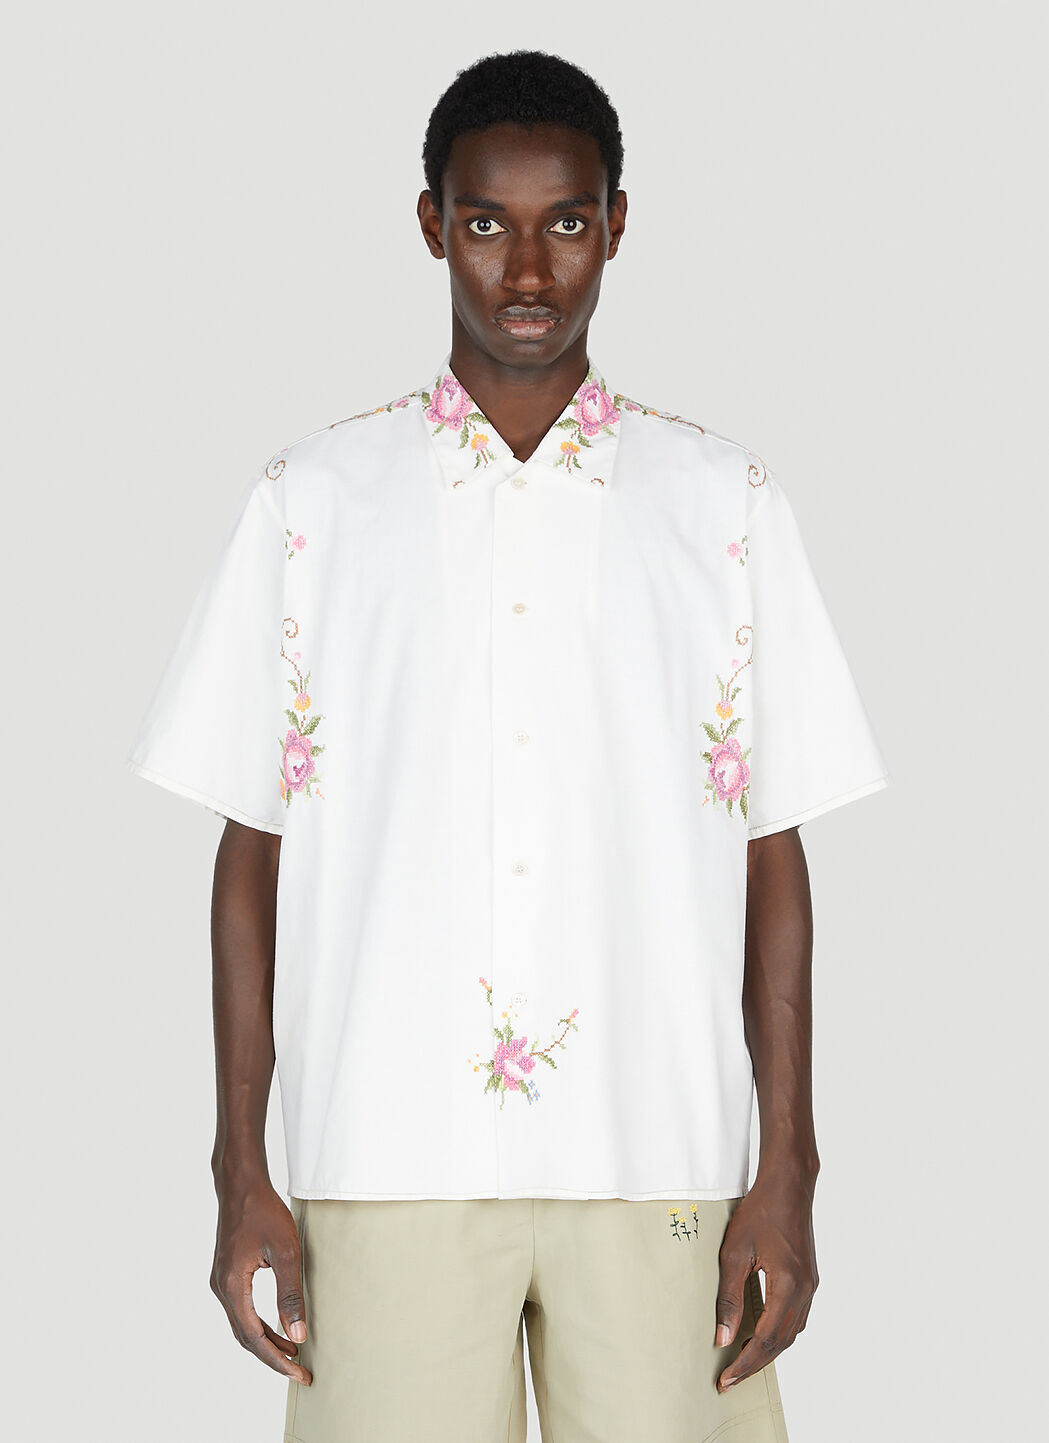 Diomene Floral Embroidered Shirt 黑色 dio0153001